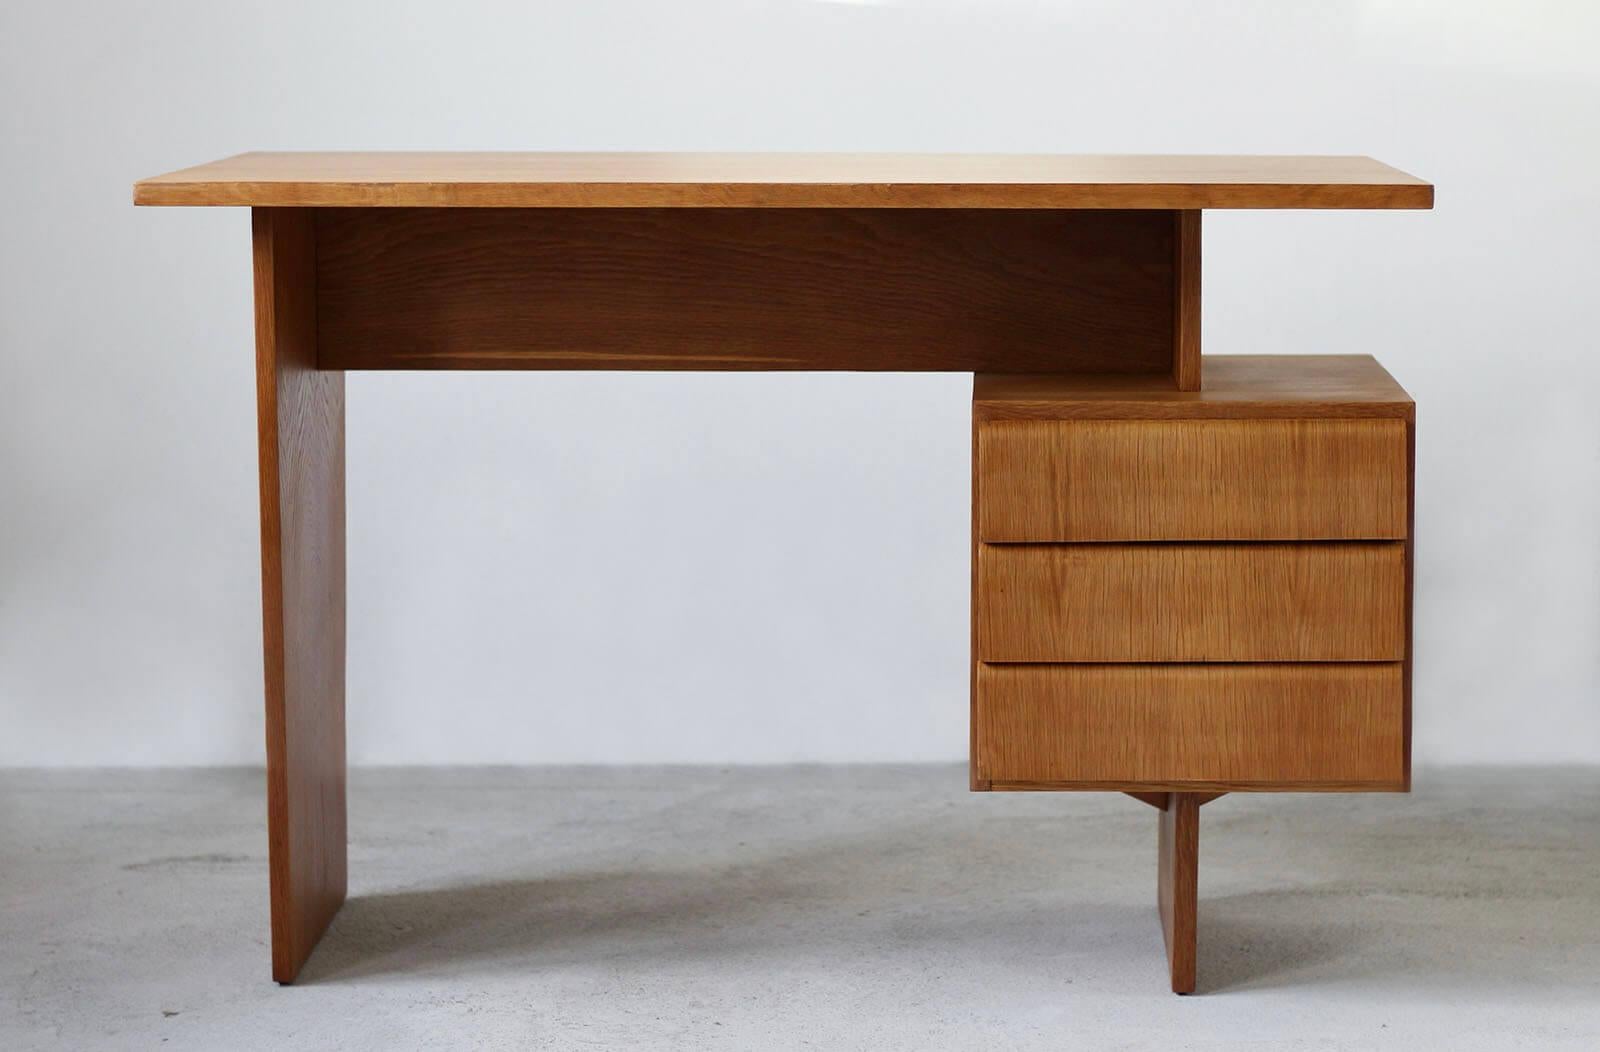 This desk was designed by Bohumil Landsman in 1970s. The design is very simple and elegant. It features a section with 3 practical drawers. The desk is covered with ash veneer with beautiful wood patterns. The piece is fully renovated, finished with